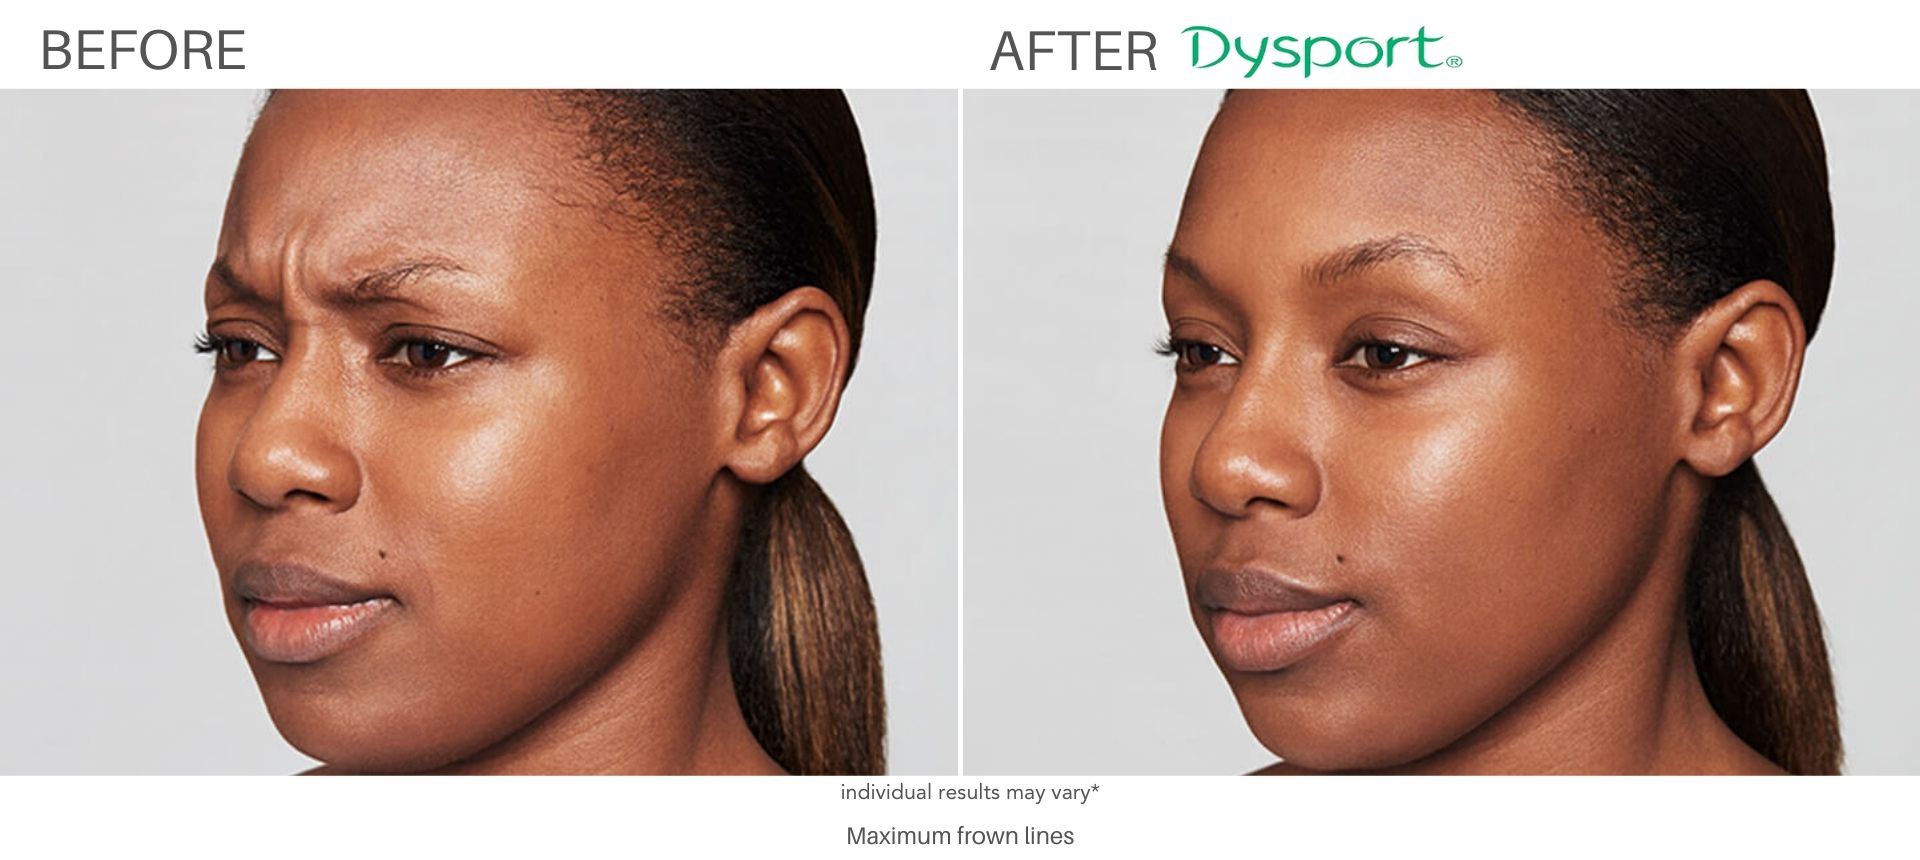 dysport before and after treatment cliffside nj